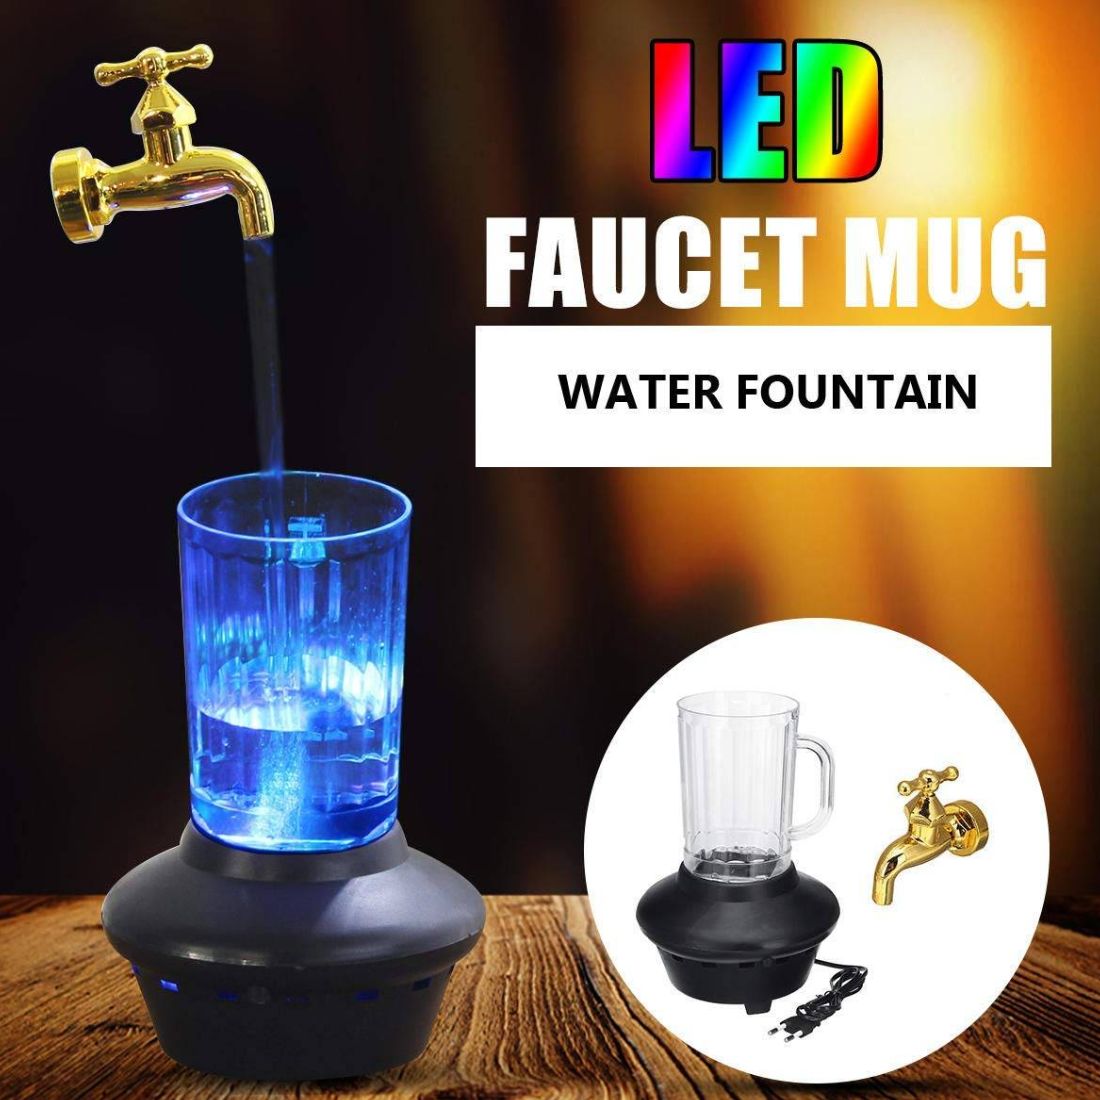 Magic Water Fountain Mug with Golden Faucet and Convertible Light - Unique Home/Office Decor